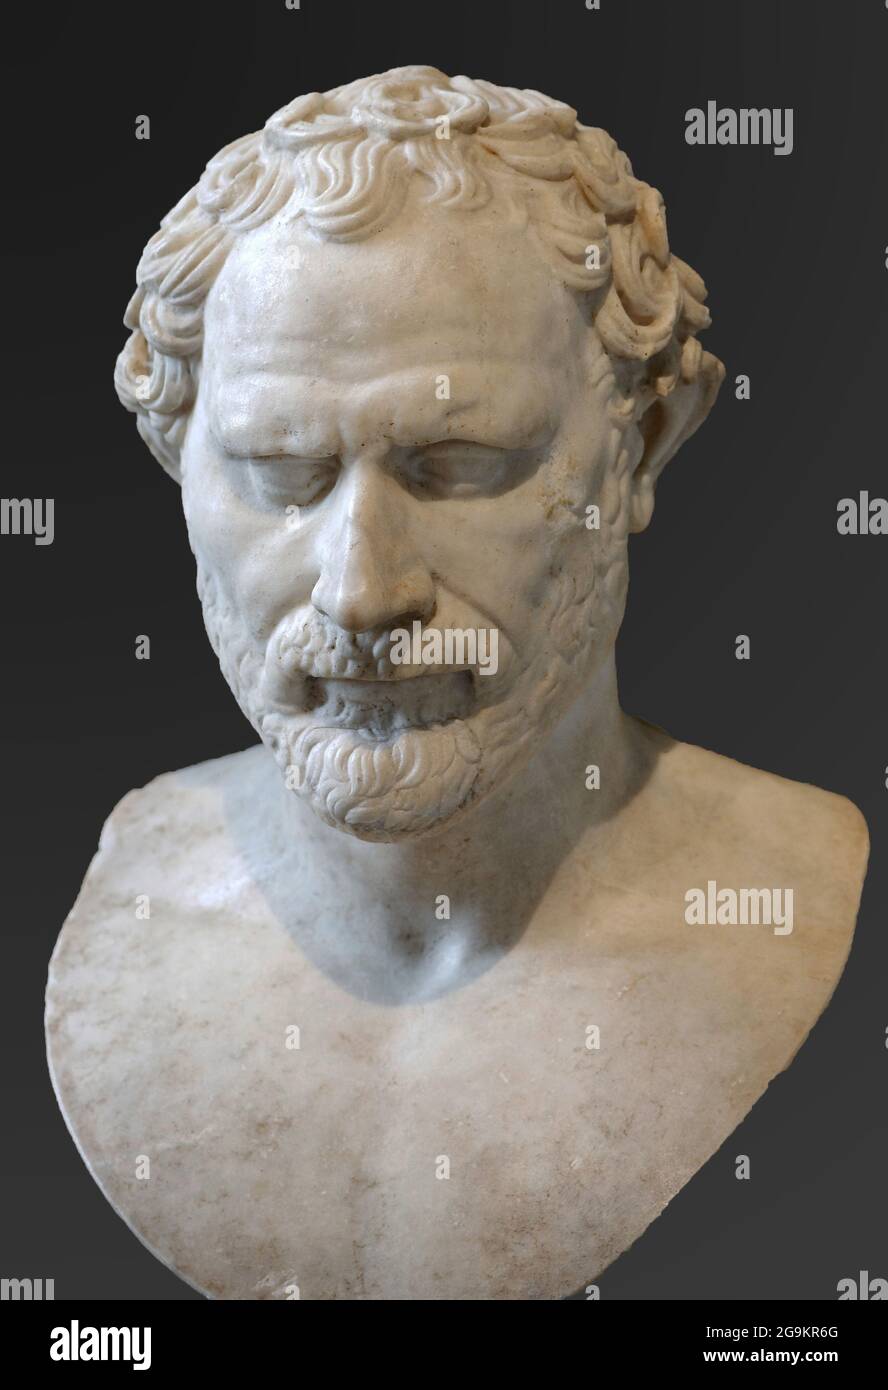 6885. Demosthenes, statesman and orator of ancient Athens, c. 4th. C. BC. Stock Photo